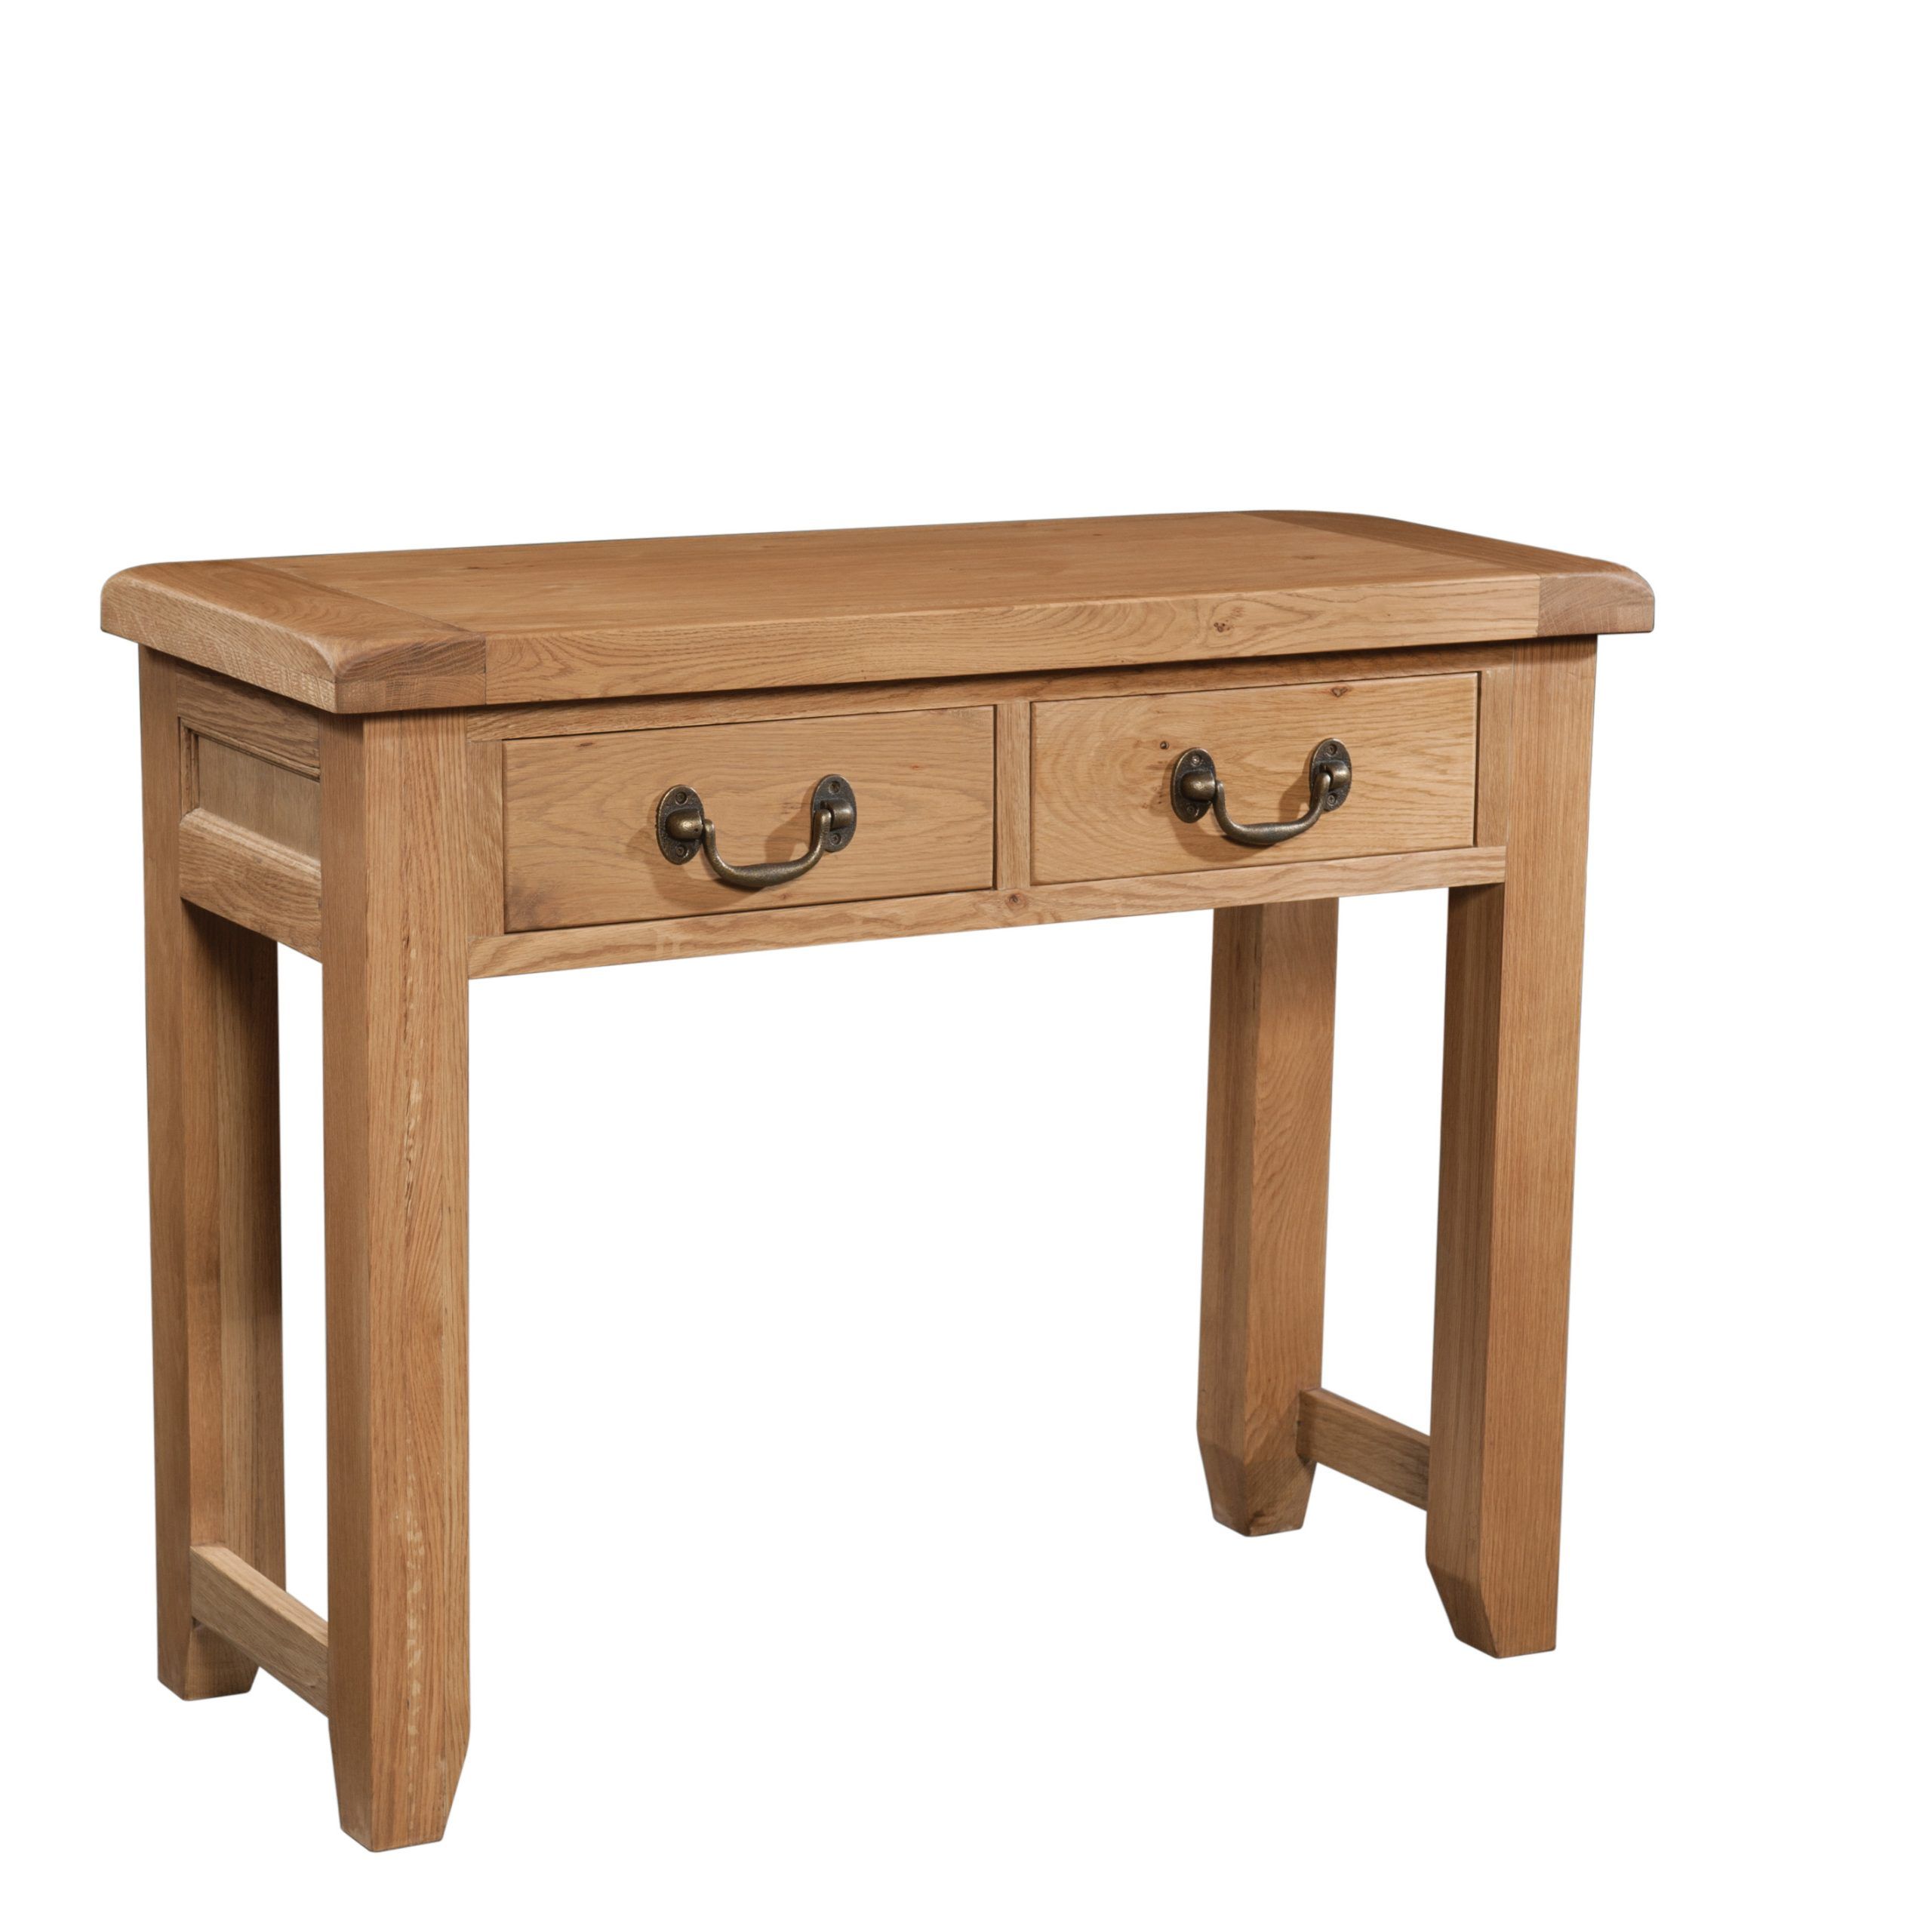 Wiltshire Rustic Oak 2 Drawer Console Table In Rustic Oak And Black Console Tables (View 5 of 20)